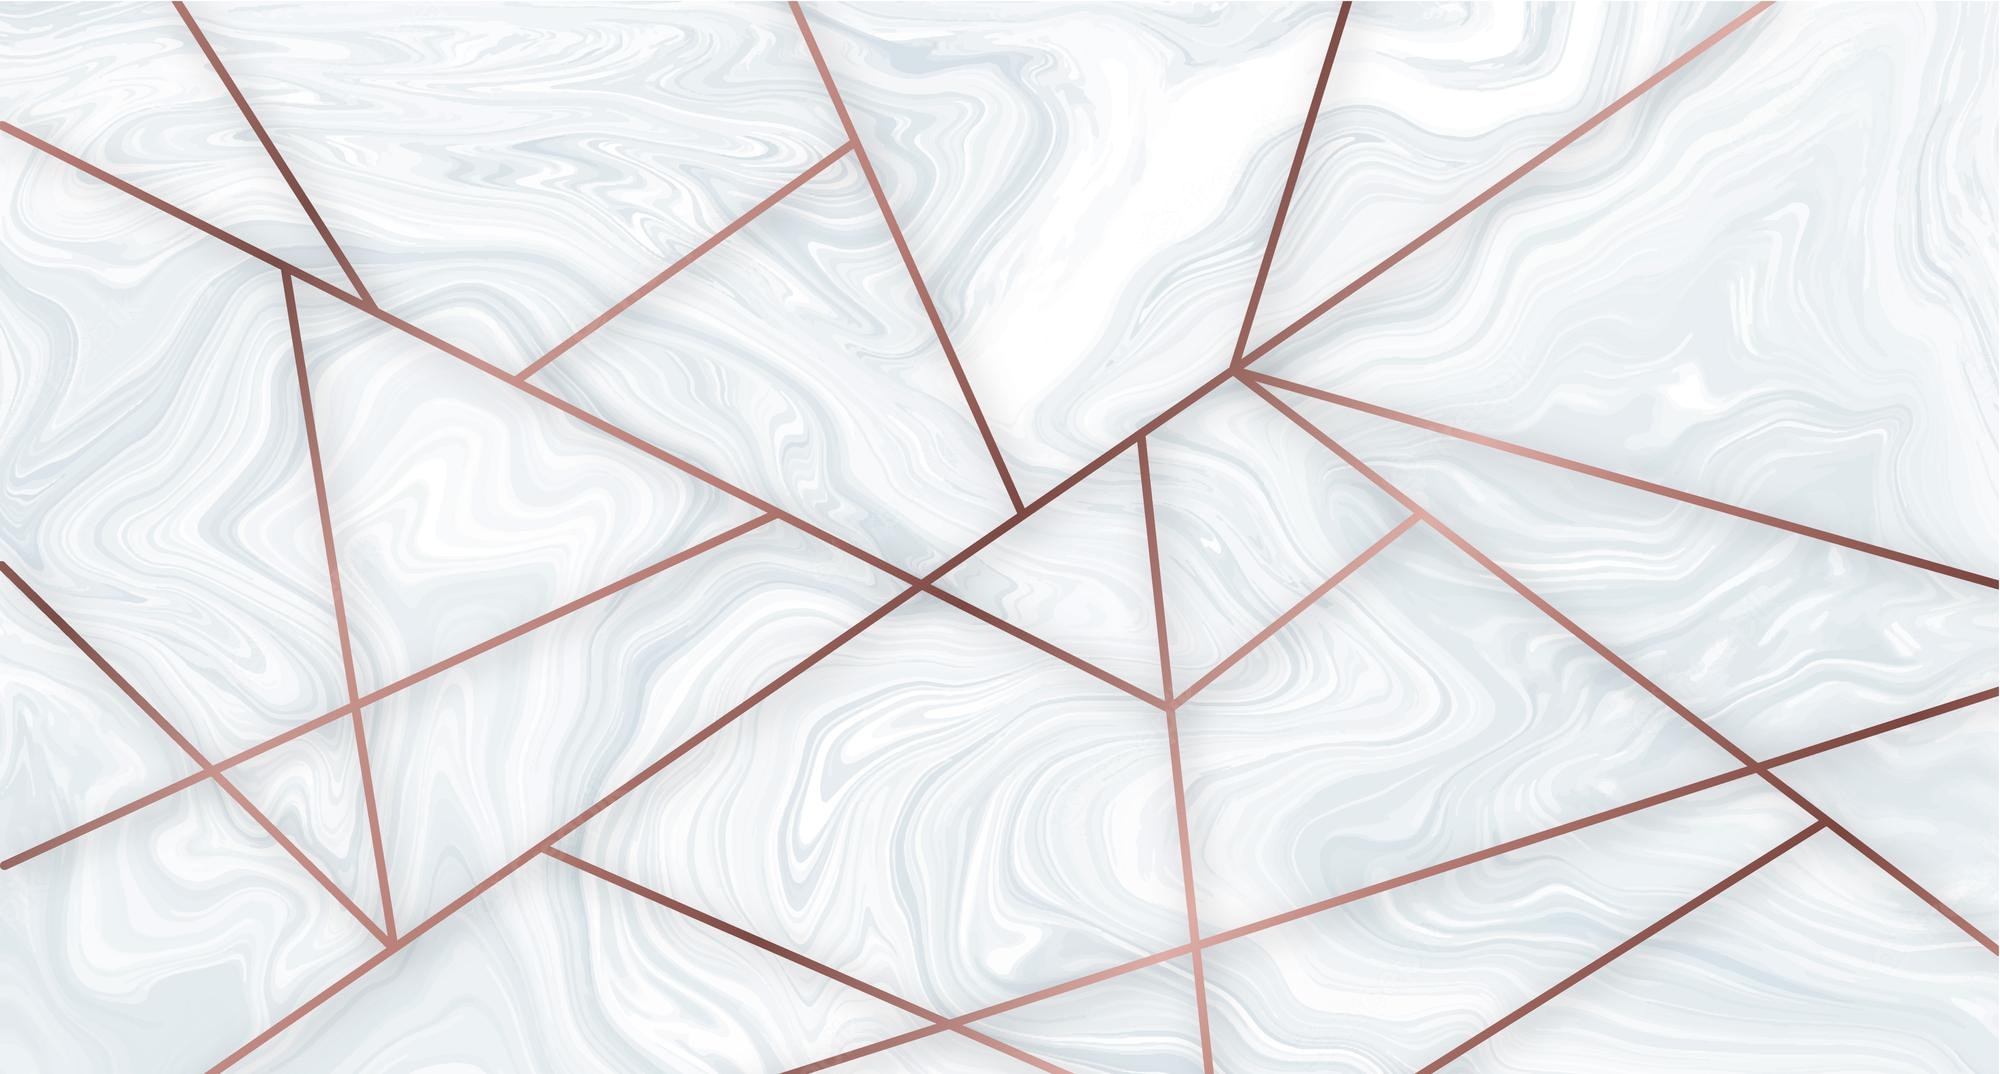 Rose Gold Marble Background Image. Free Vectors, & PSD